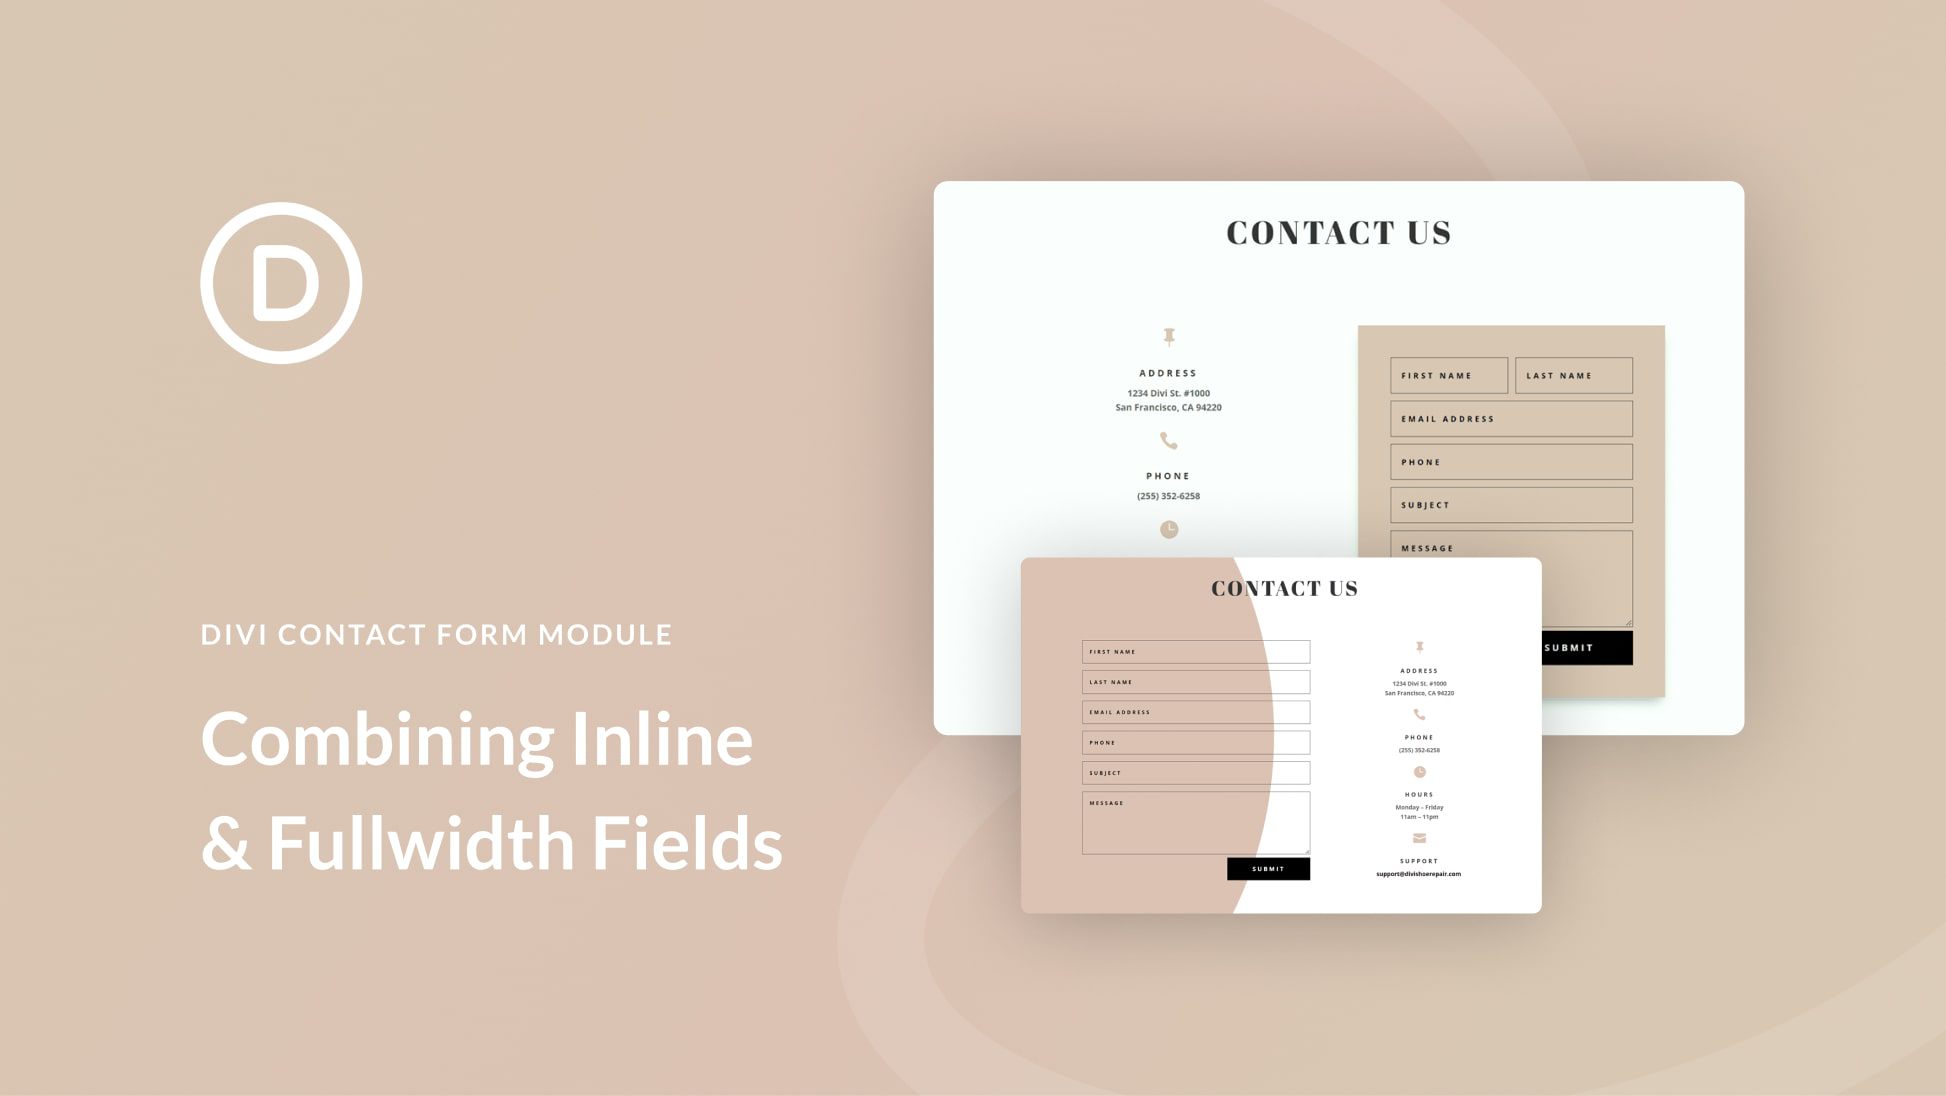 How to Combine Inline & Fullwidth Fields in Divi’s Contact Form Module